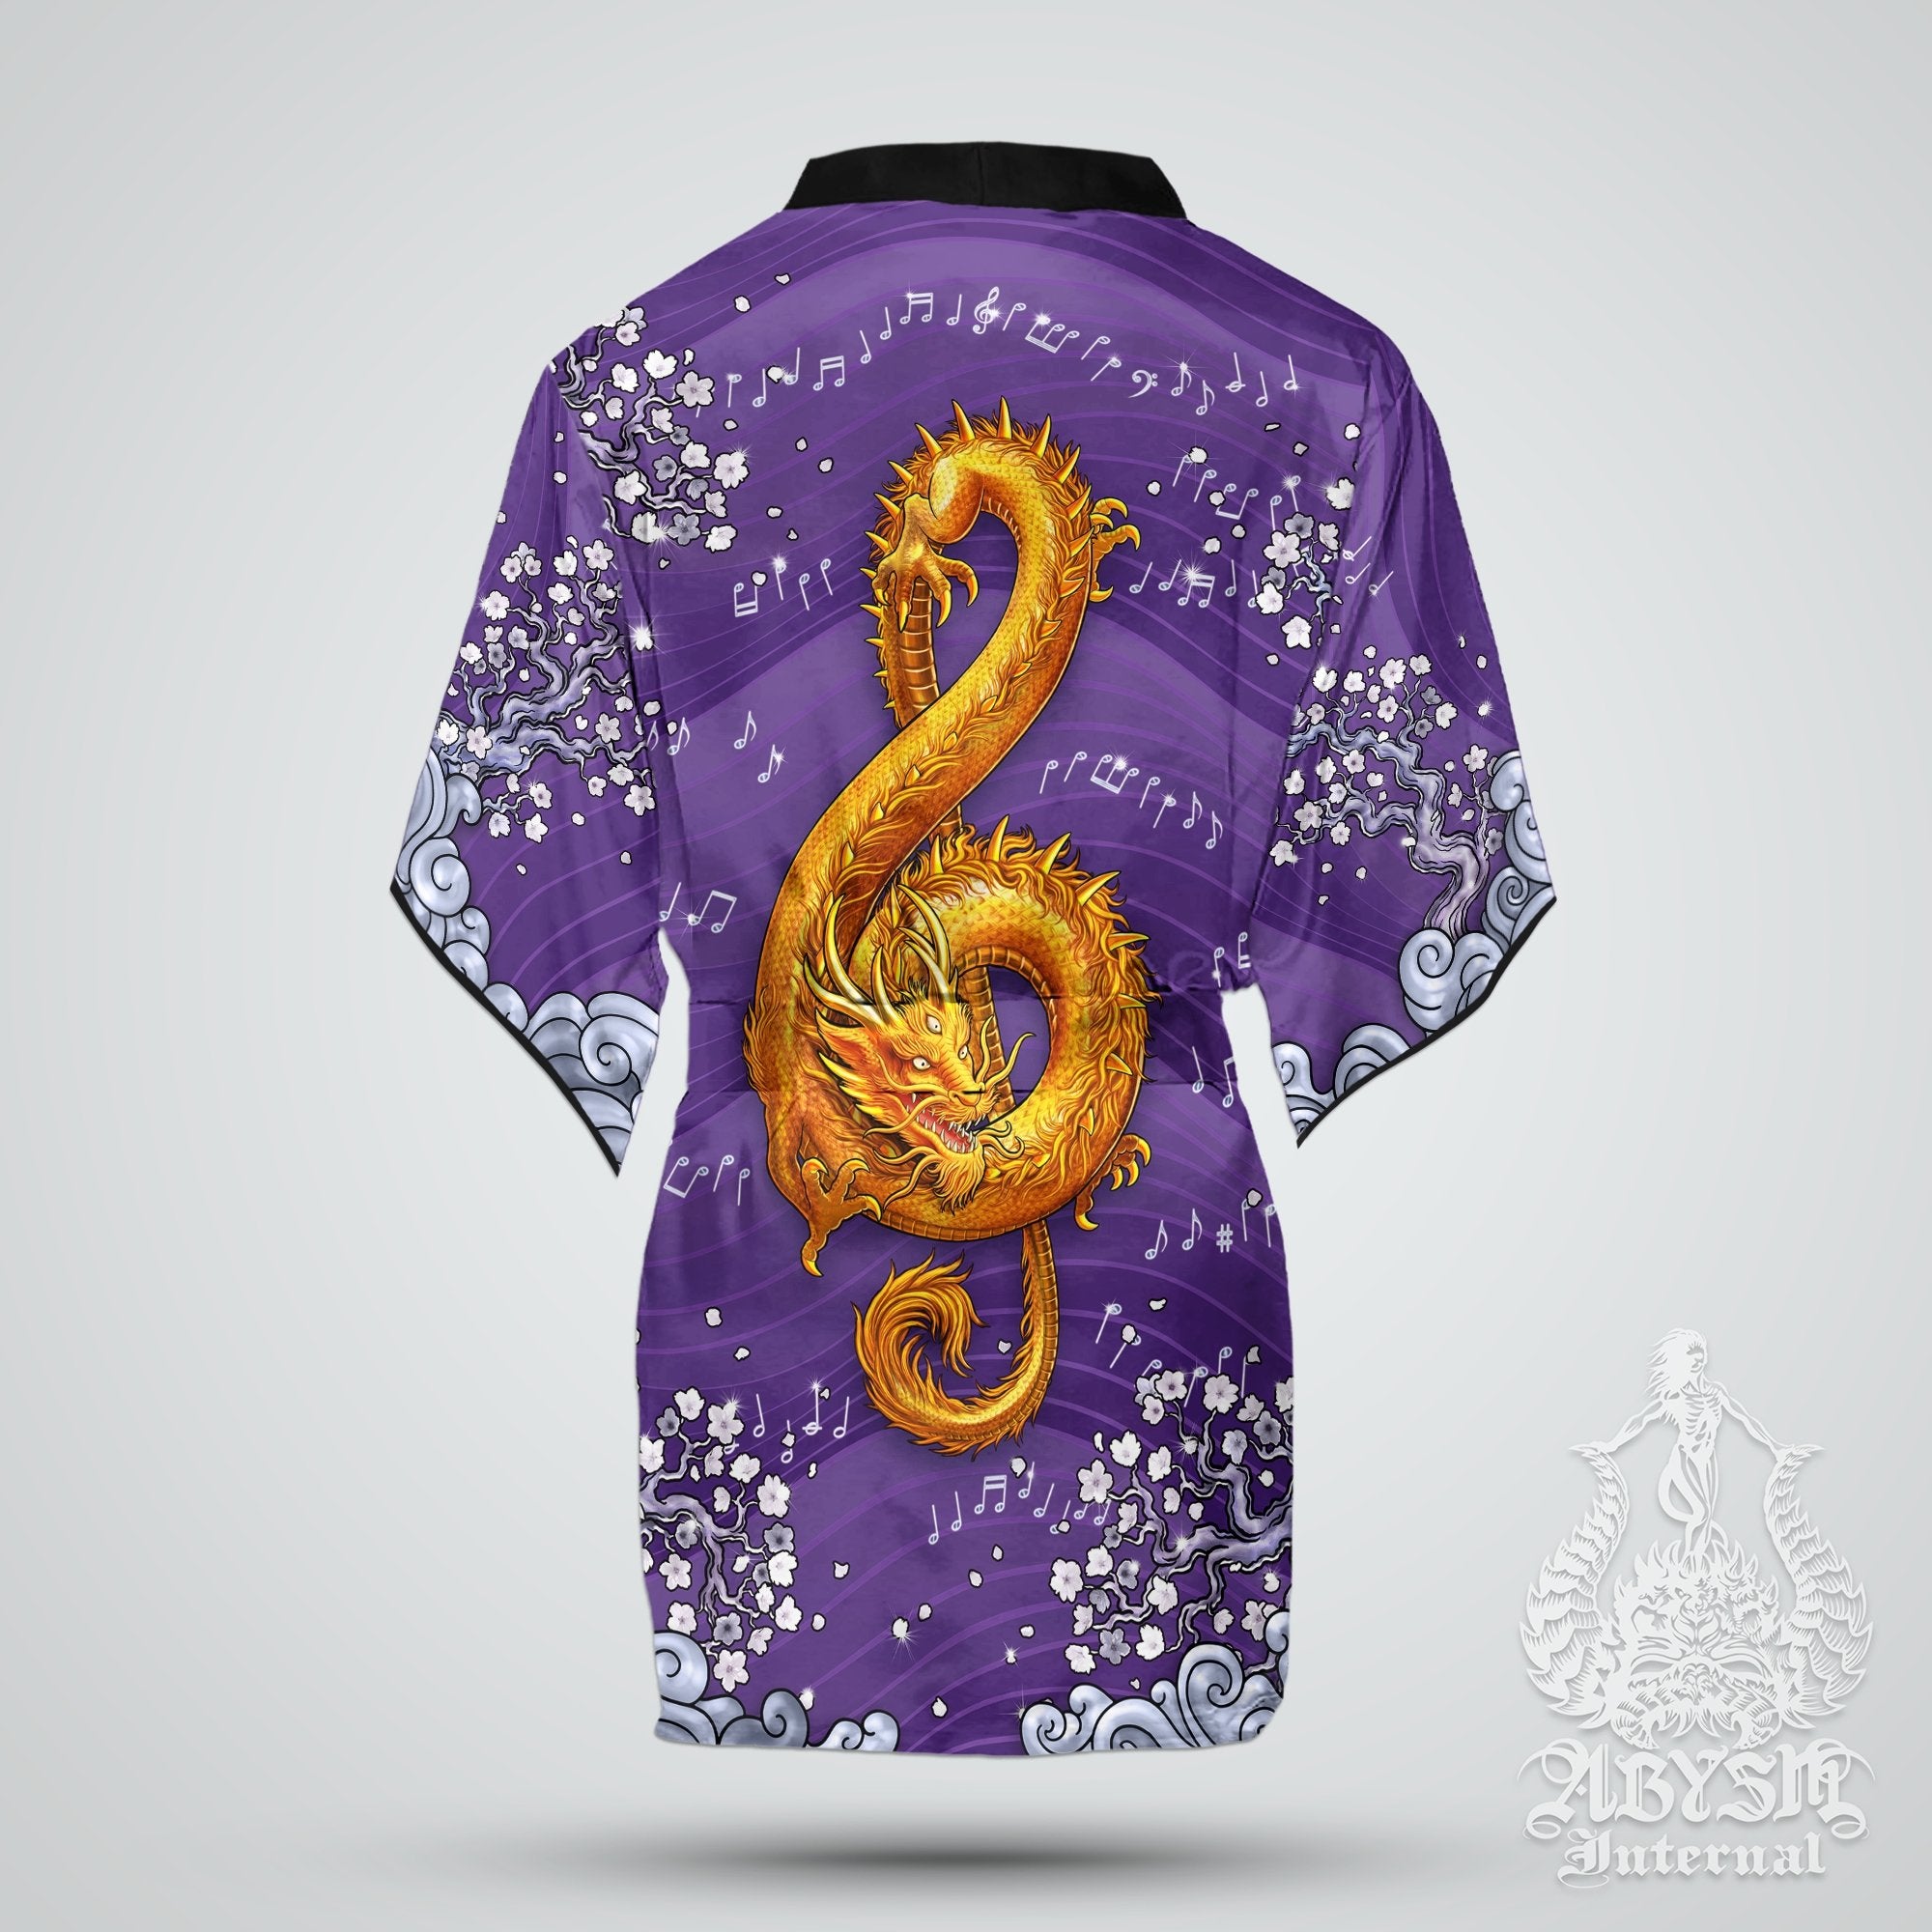 Music Cover Up, Beach Outfit, Party Kimono, Summer Festival Robe, Indie and Alternative Clothing, Unisex - Dragon, Purple Gold - Abysm Internal